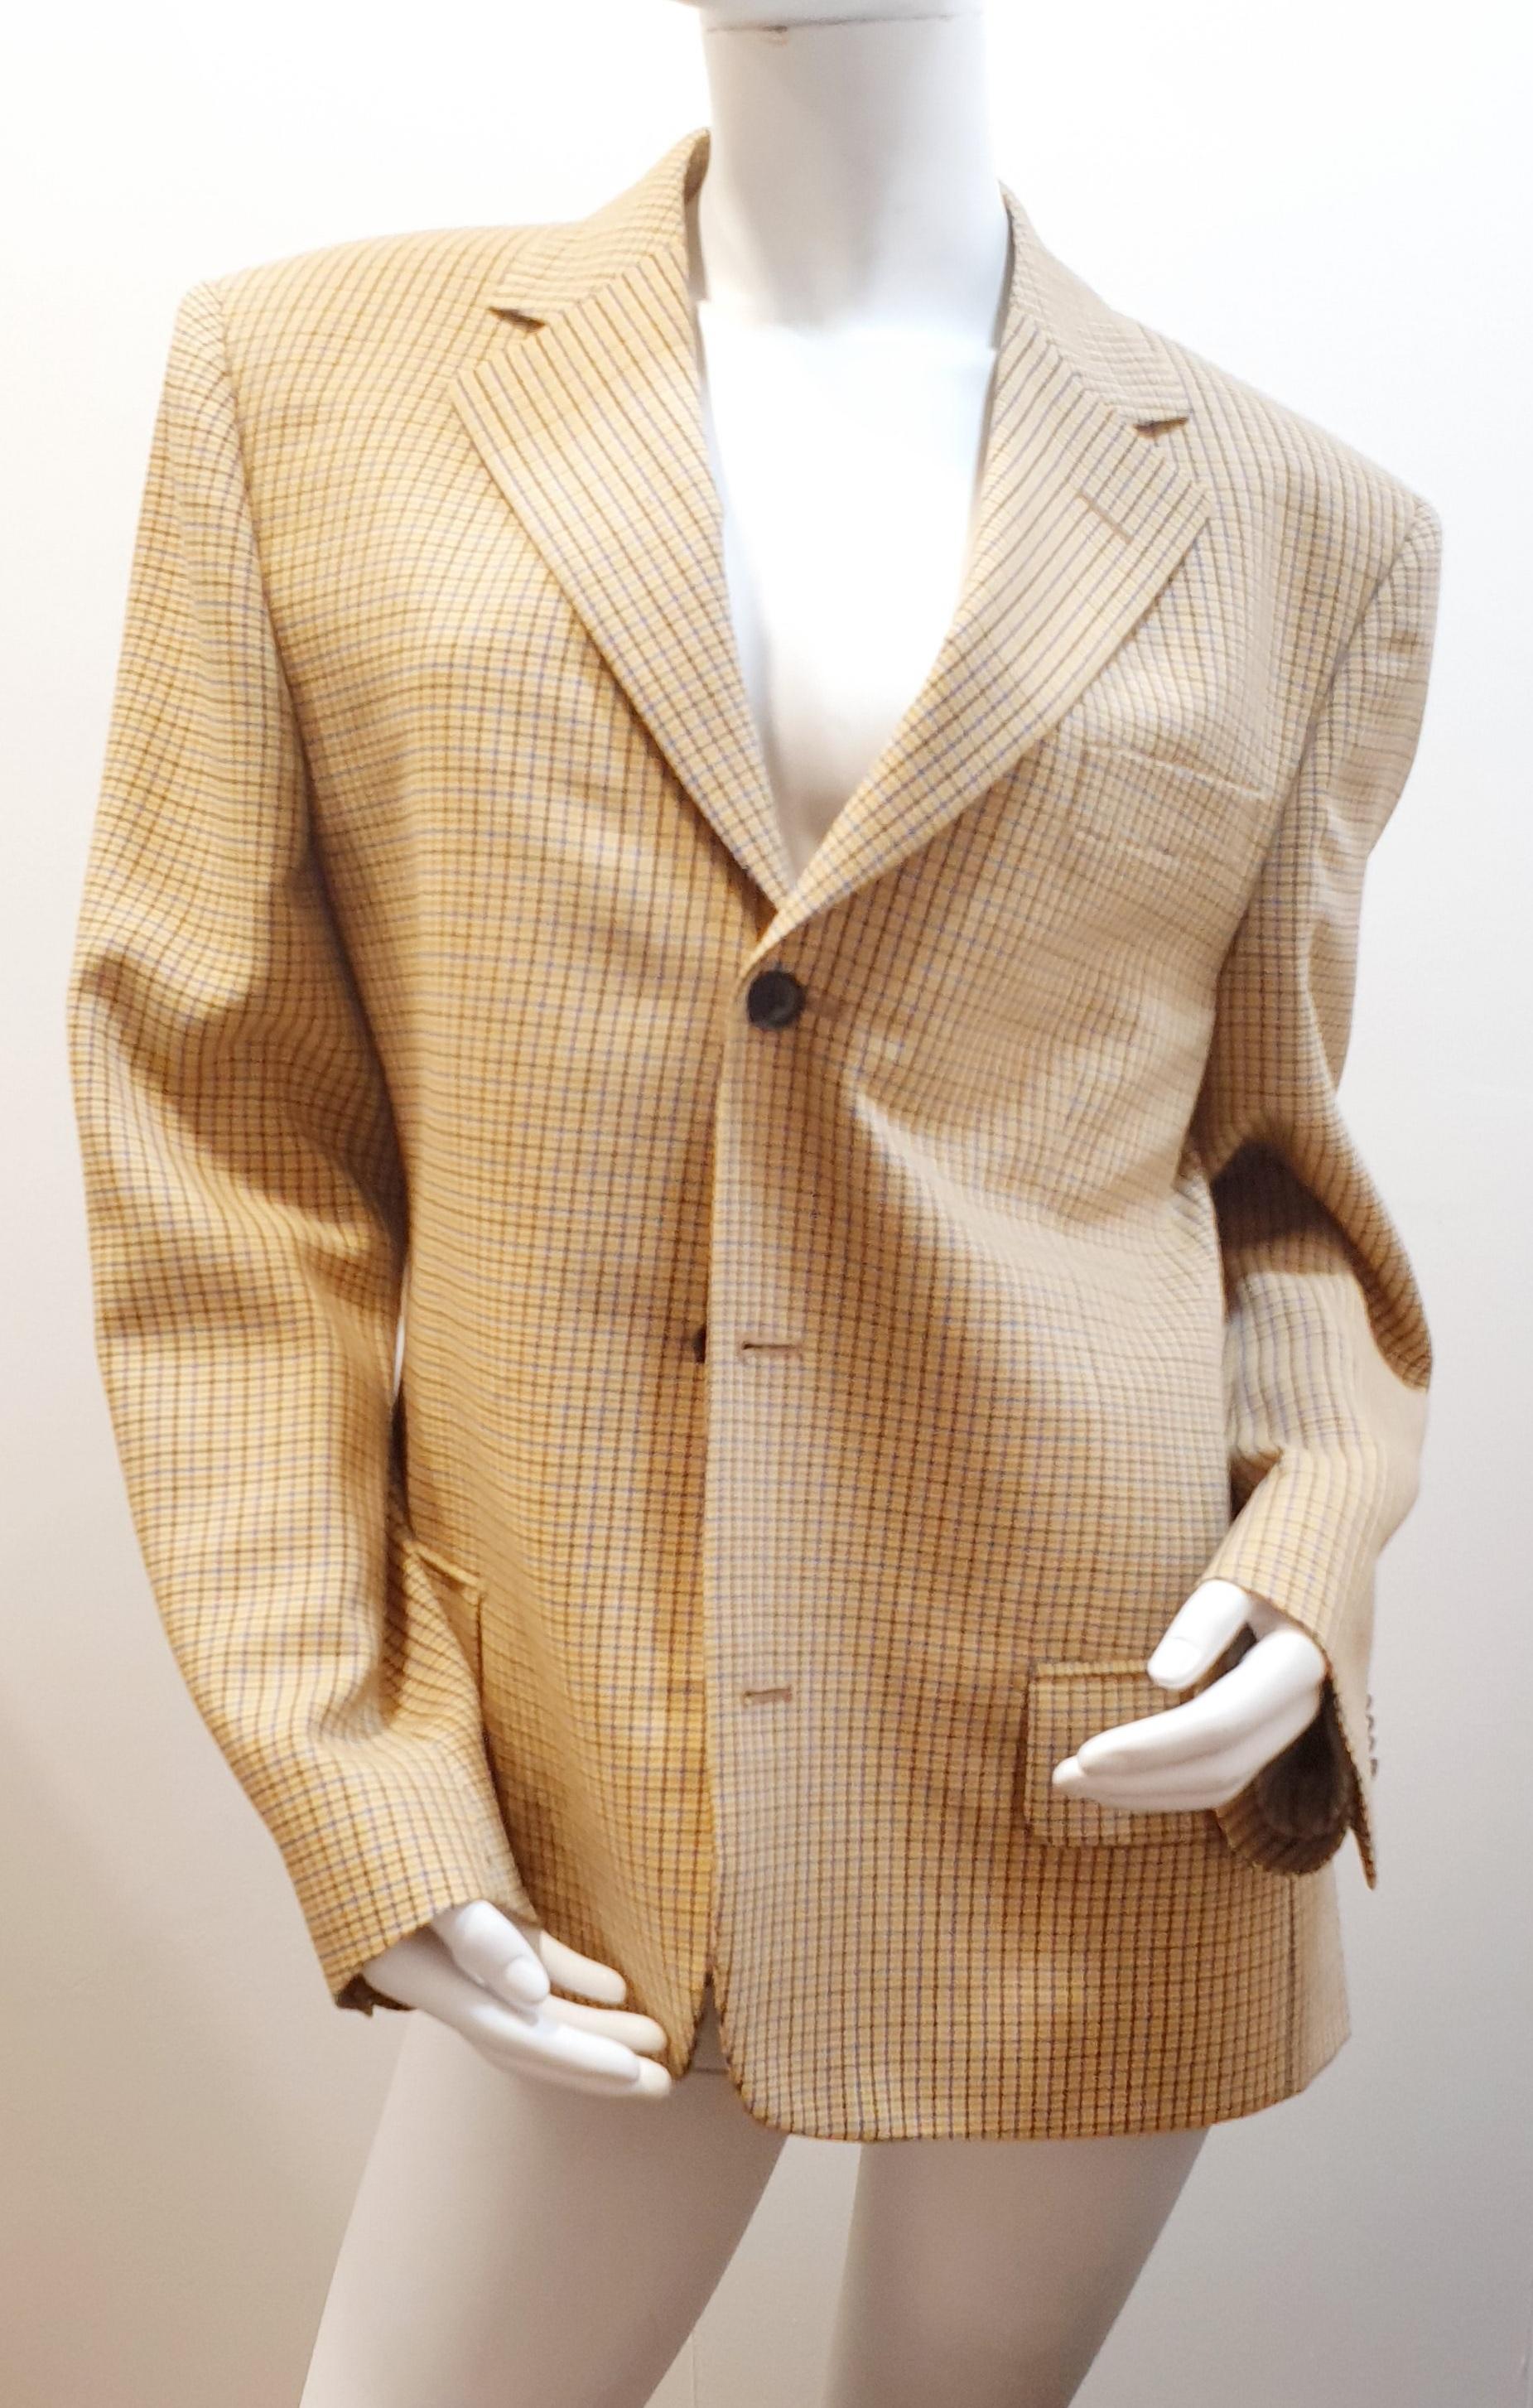 Smith & Smith Men's Checked Blazer from the Black & Blue collection
The front closure is three buttons. The back has a double opening
The length from the shoulder is 70 cm ( 27,55 inches )
The sleeve length is 65 cm (25,59 inches )

Our Company